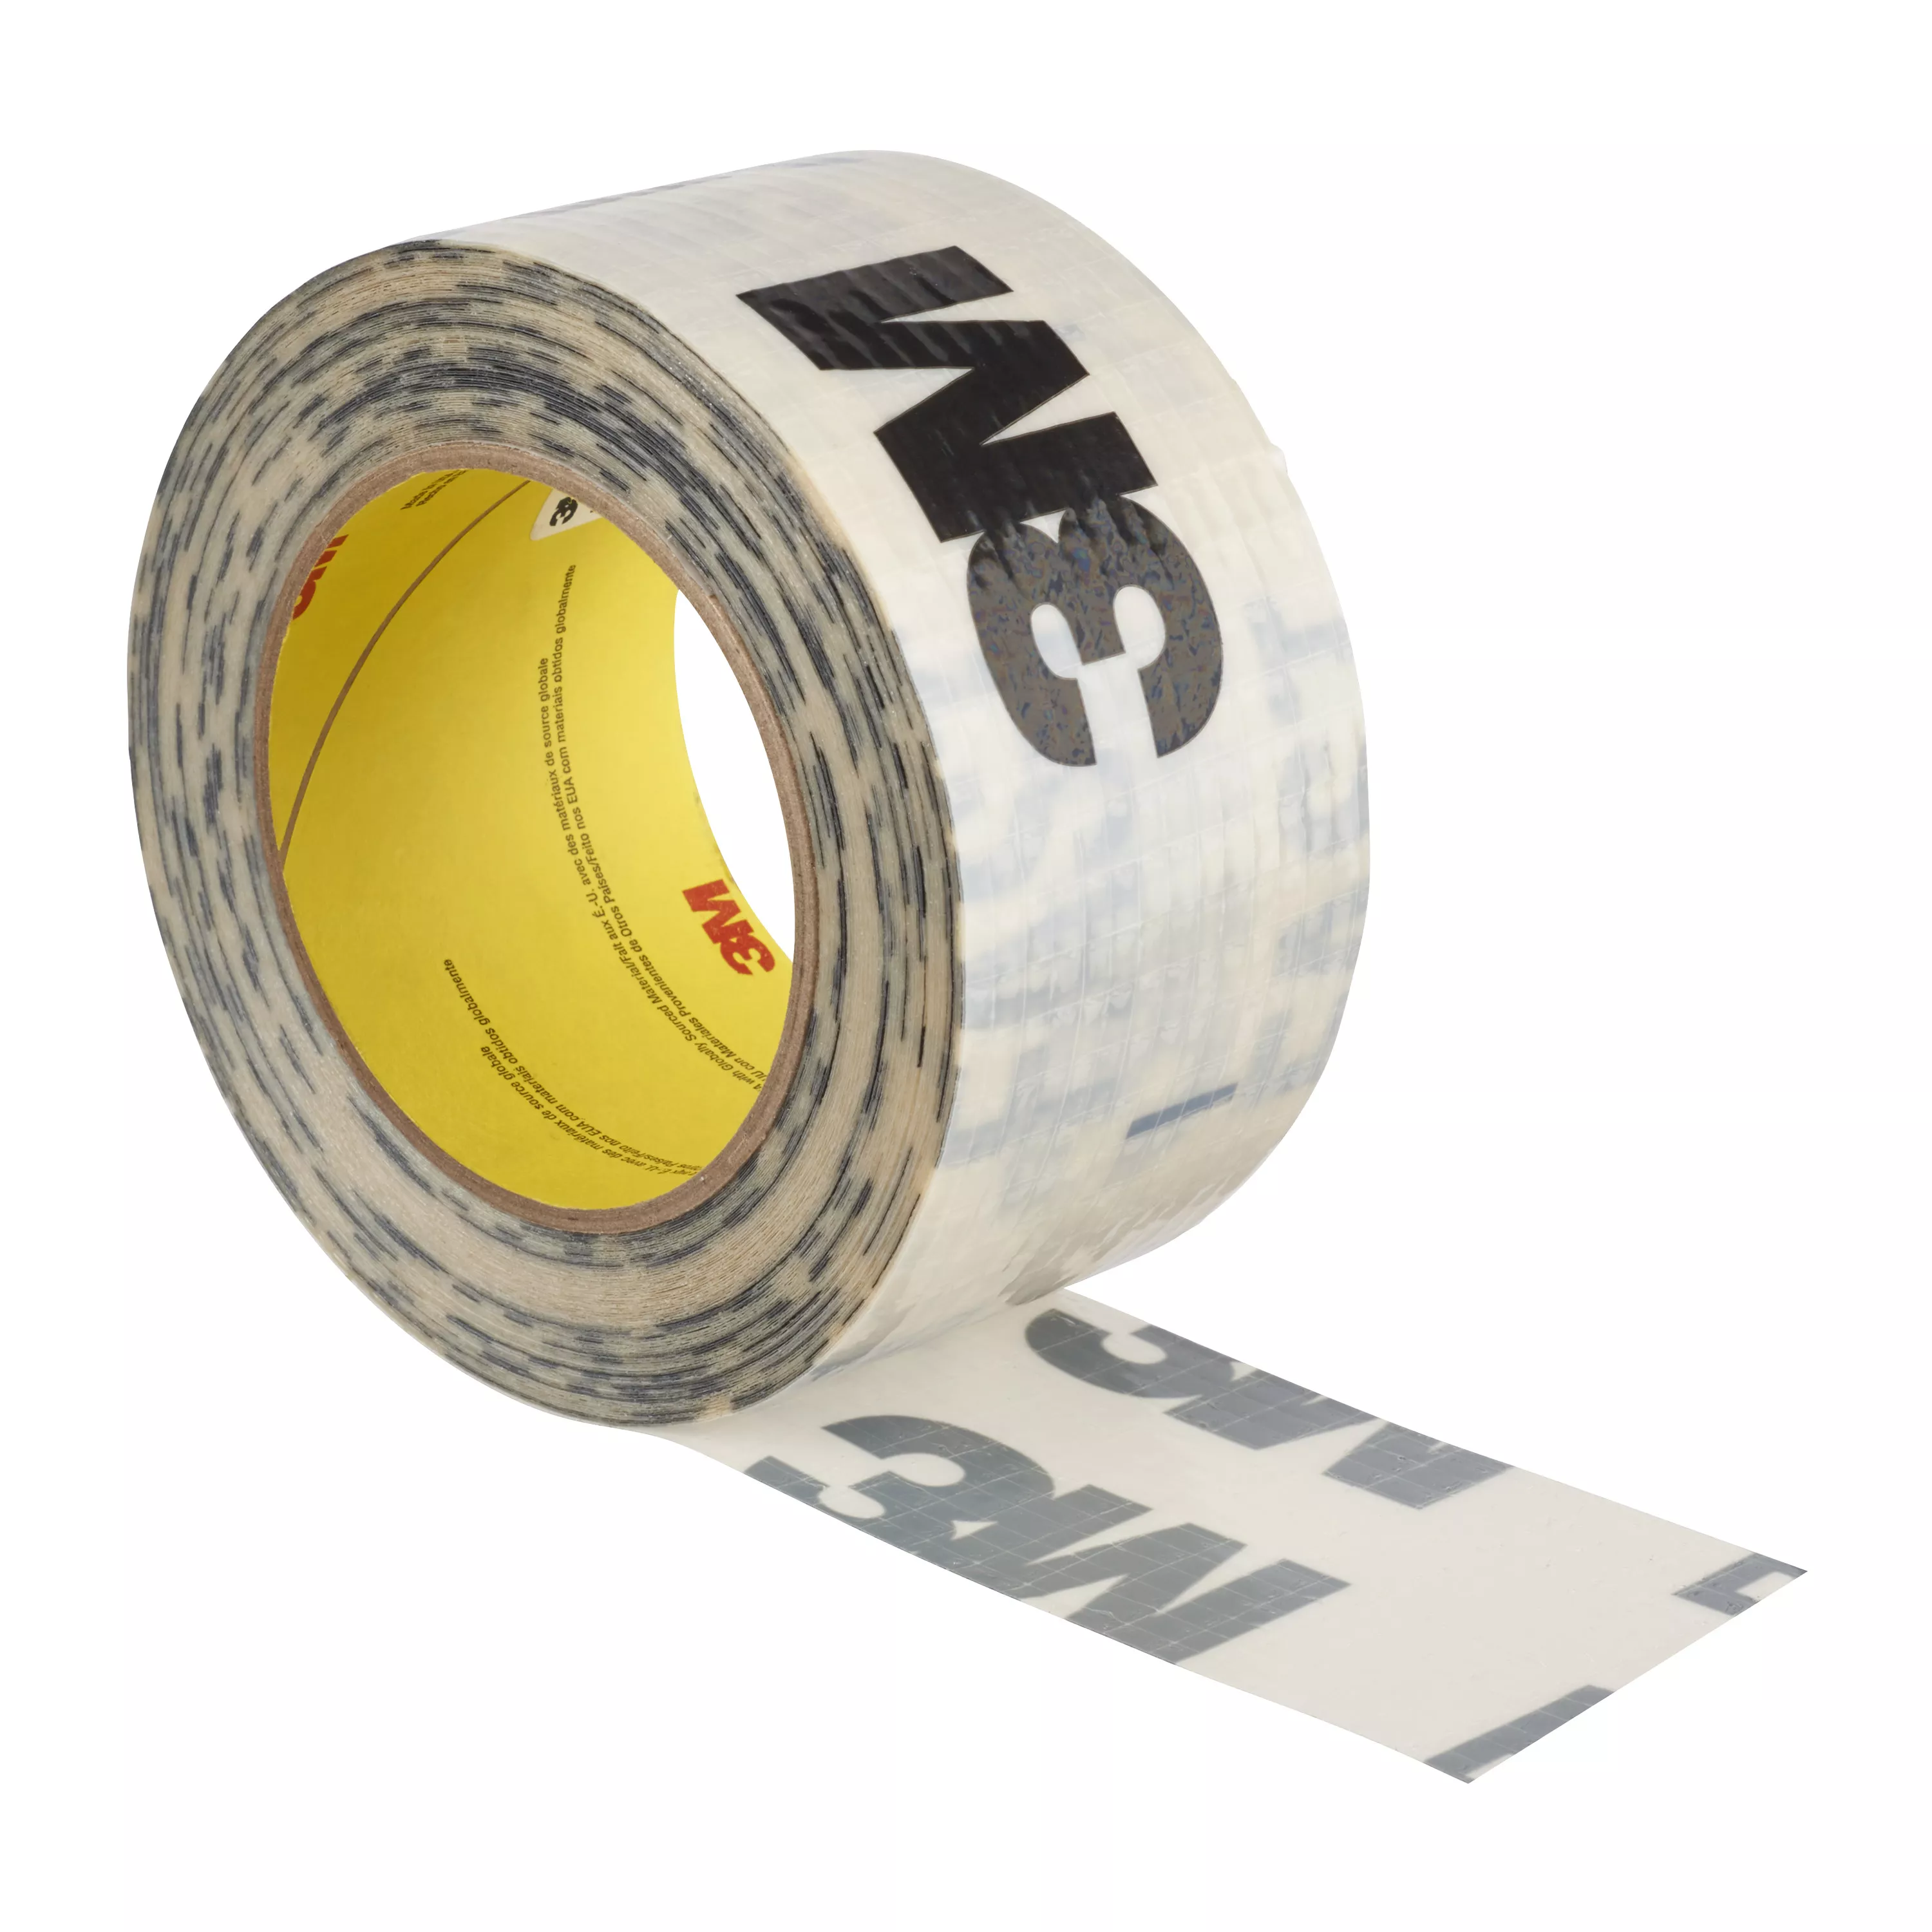 3M™ Grid Air Sealing Tape 8068-NL, 4 in x 75 ft, 8 Rolls/Case